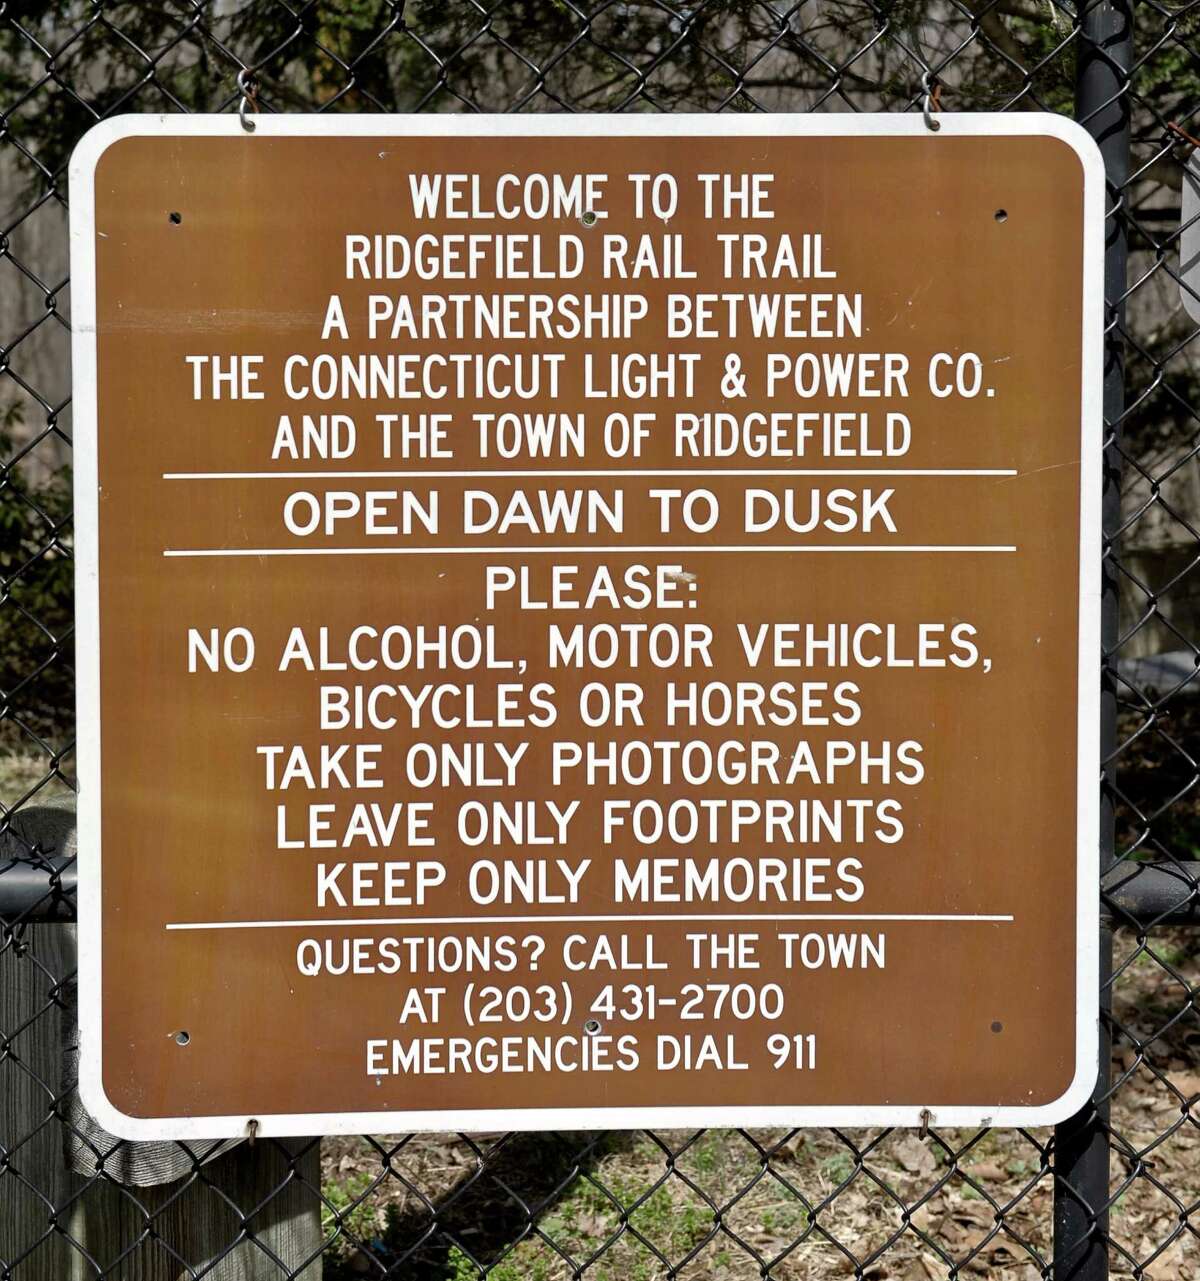 The Ridgefield Rail Trail runs 2.3 miles from downtown Ridgefield to the Branchville area of the town. Wednesday, April 15, 2015, in Ridgefield, Conn.